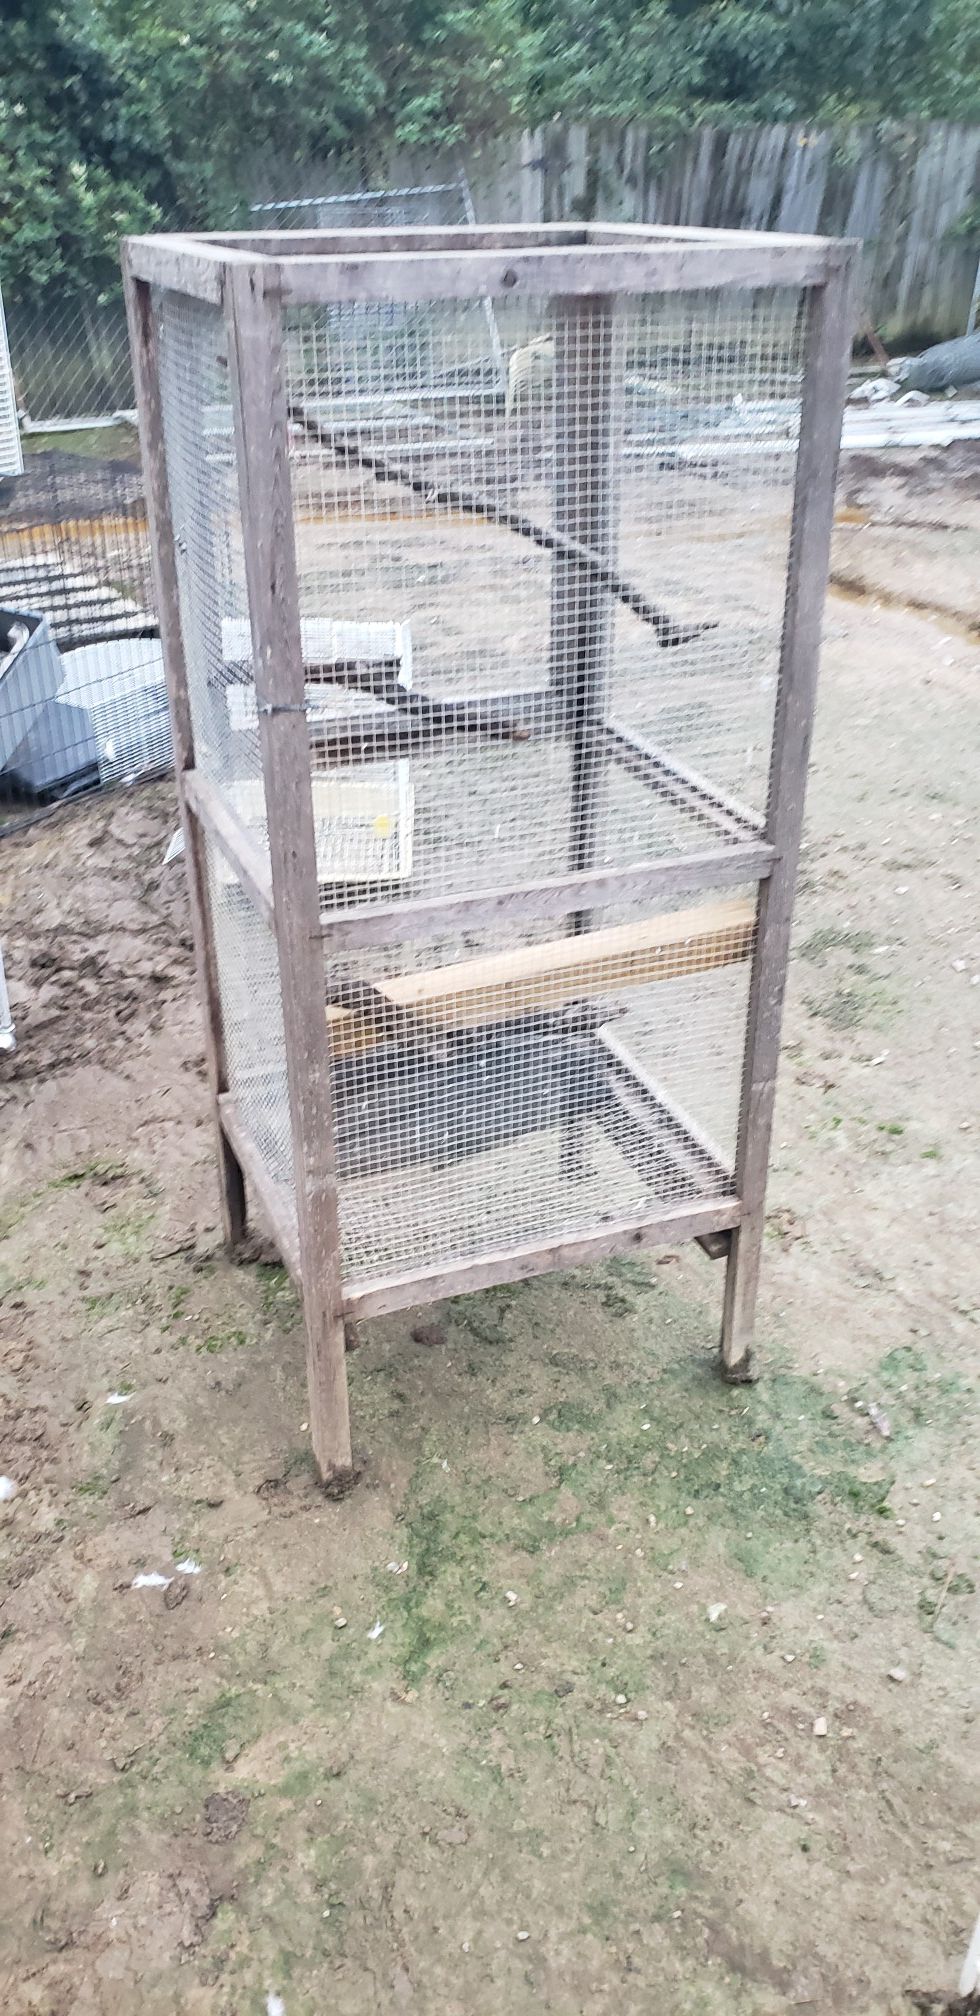 Wooden bird cage - $40 obo